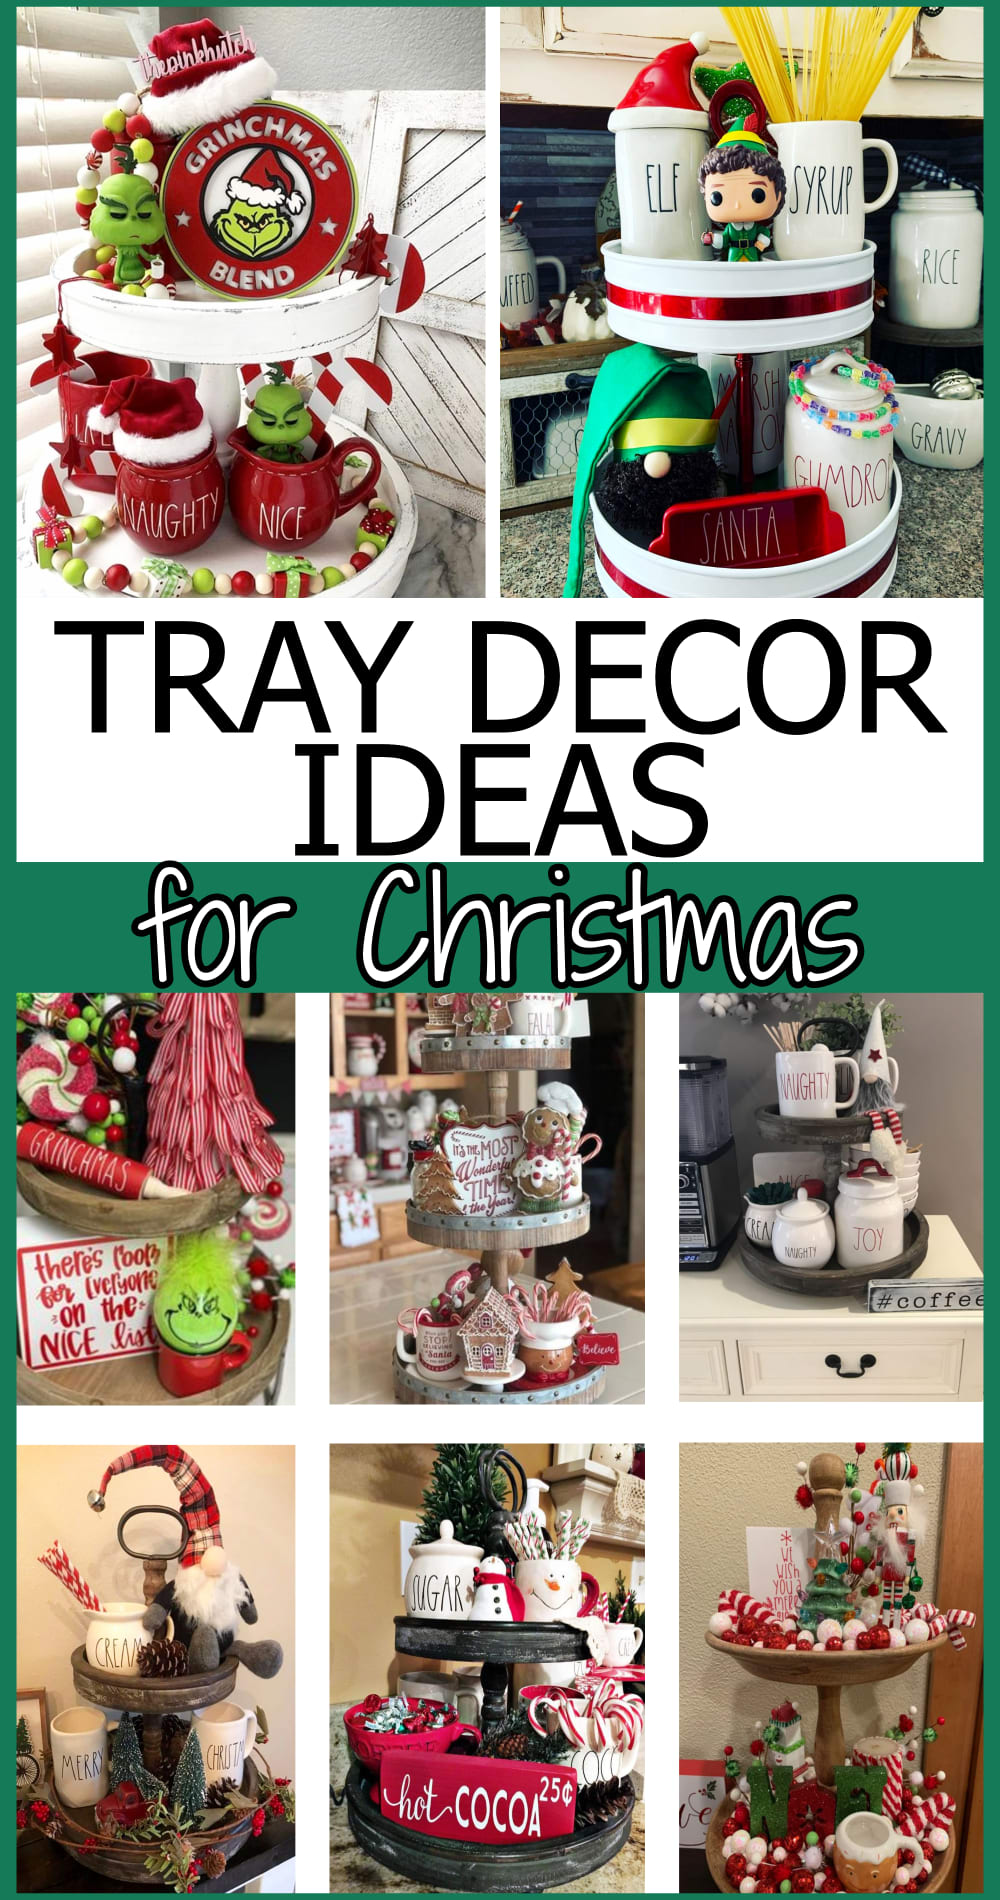 Tray decor ideas for Christmas tiered trays and wooden table trays - Grinch decorations, Buddy the Elf, gnomes, hot cocoa bar and more